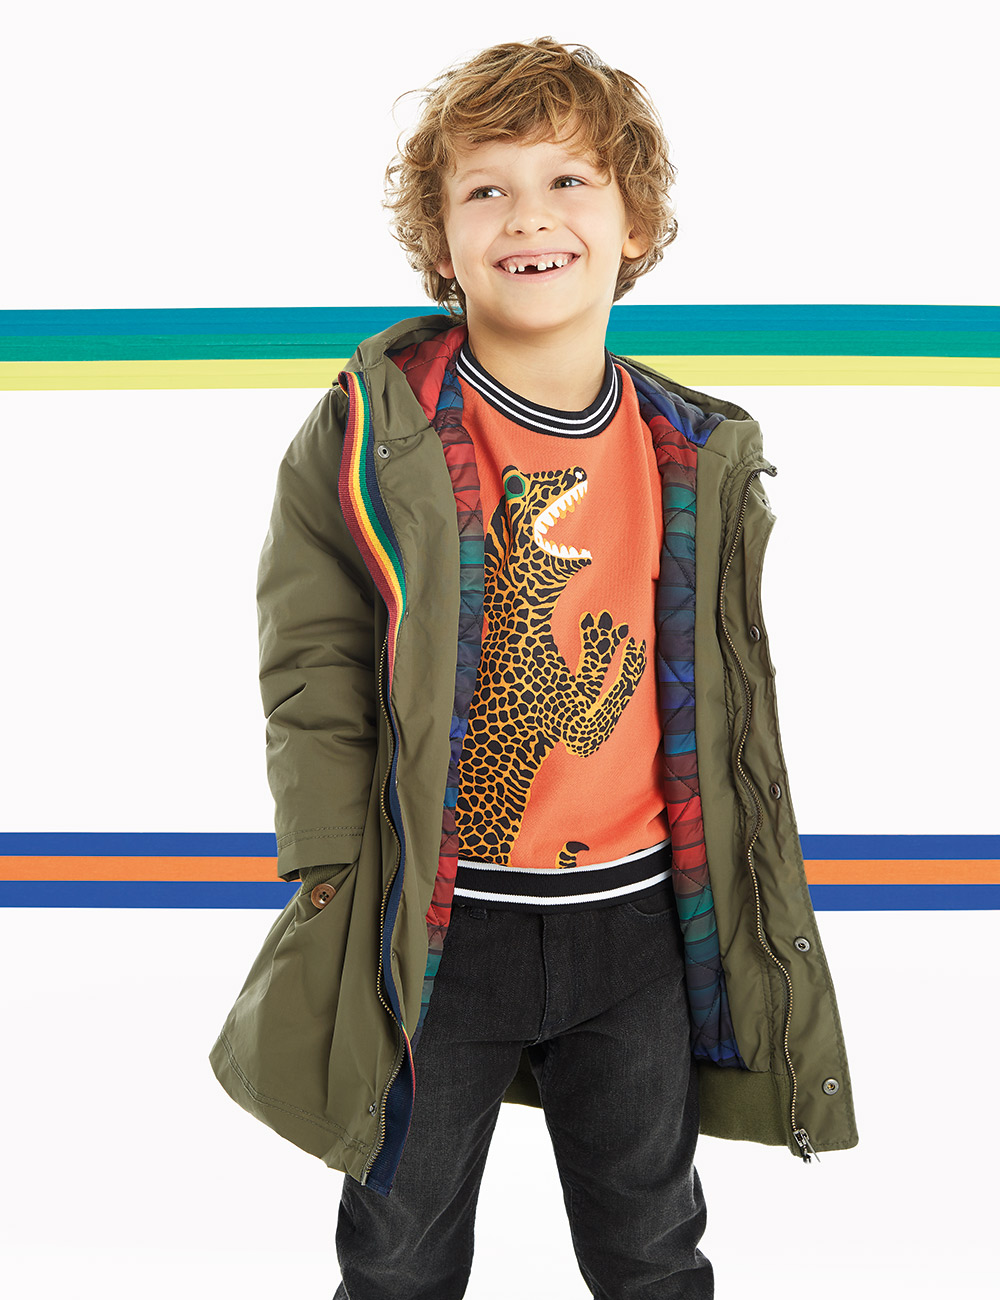 Paul Smith Junior Collection Full Of Designer Childrenswear Across All Ages